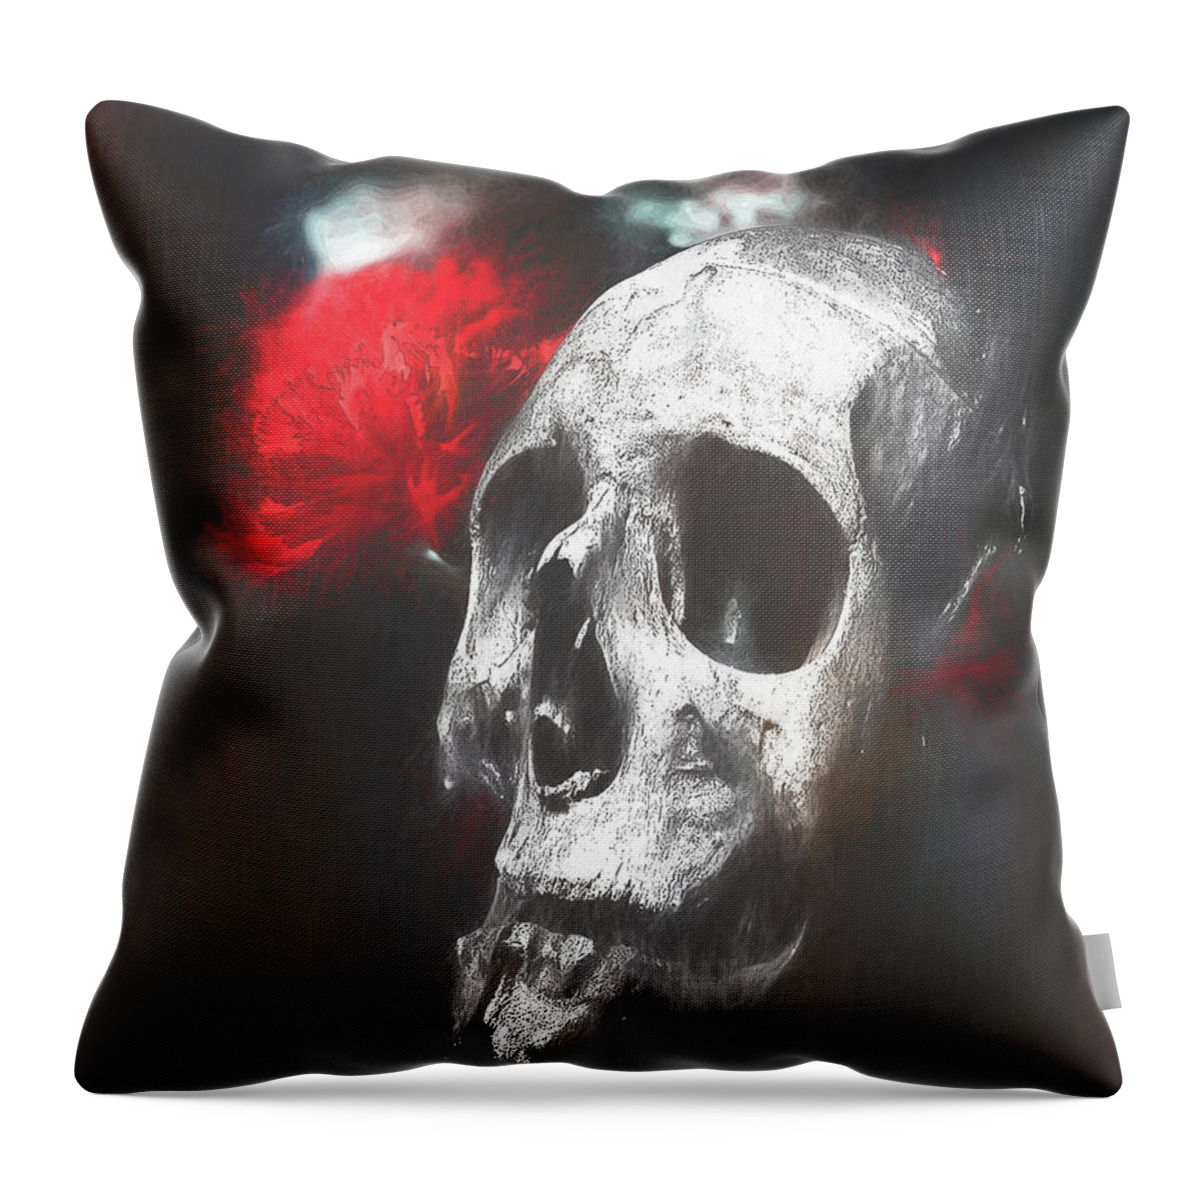 Skull And Flowers Throw Pillow featuring the mixed media Skull And Flowers by Dan Sproul